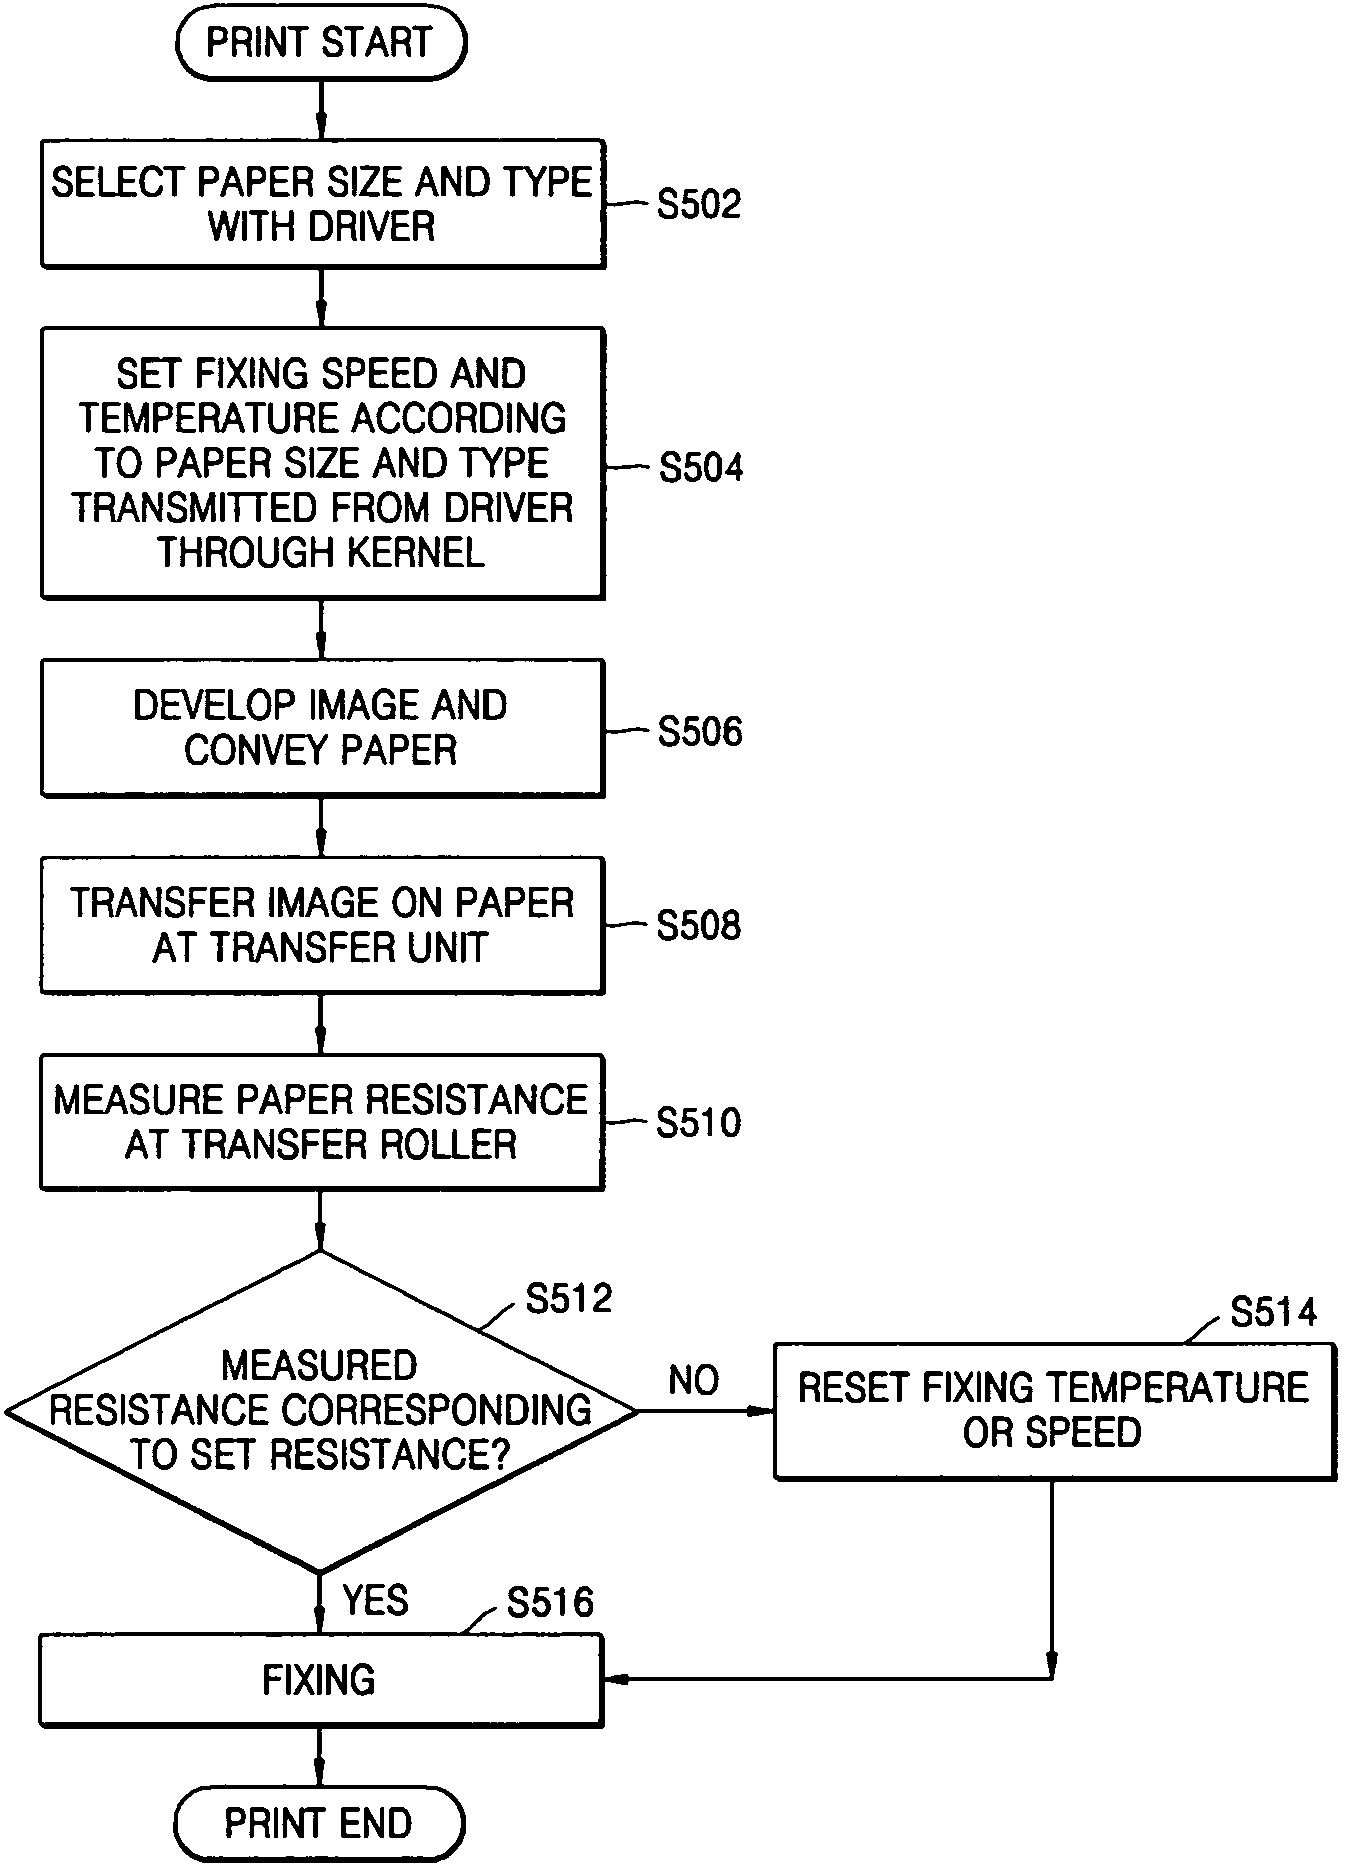 Method and apparatus for controlling a fixer of a printer